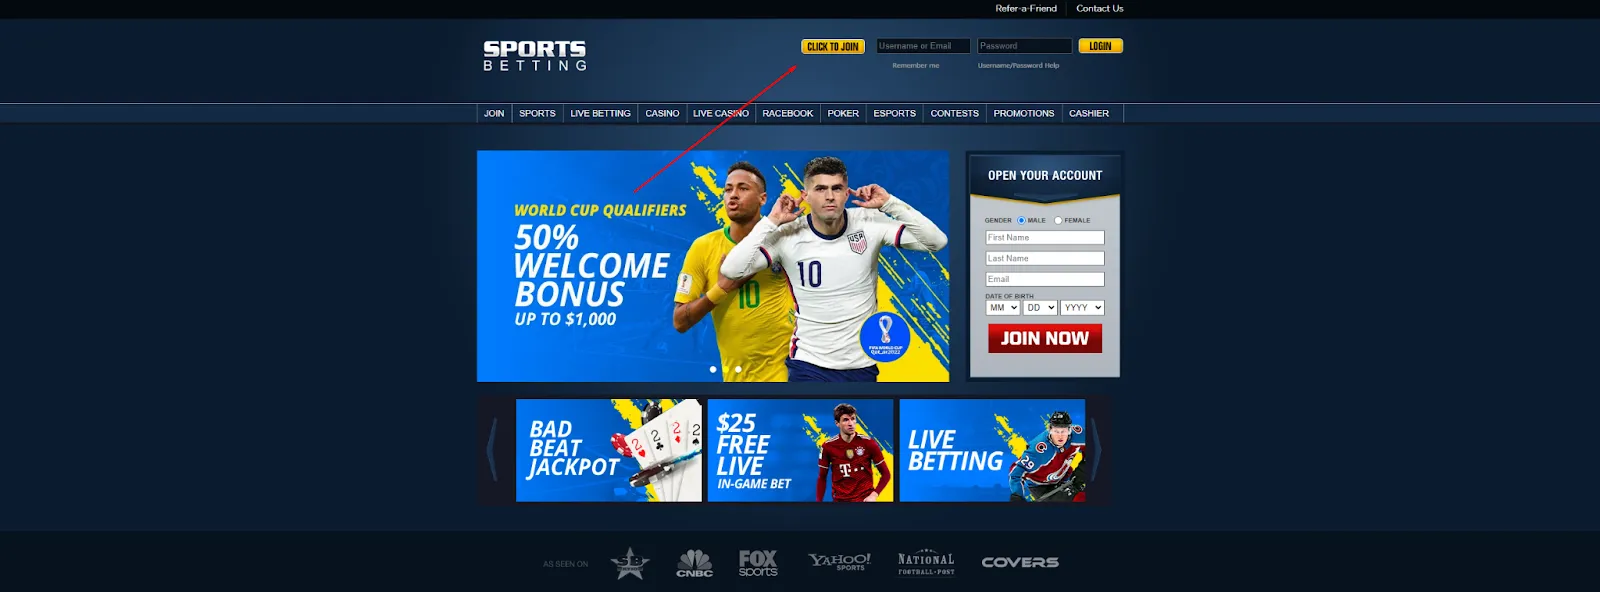 Sportsbetting join main page.